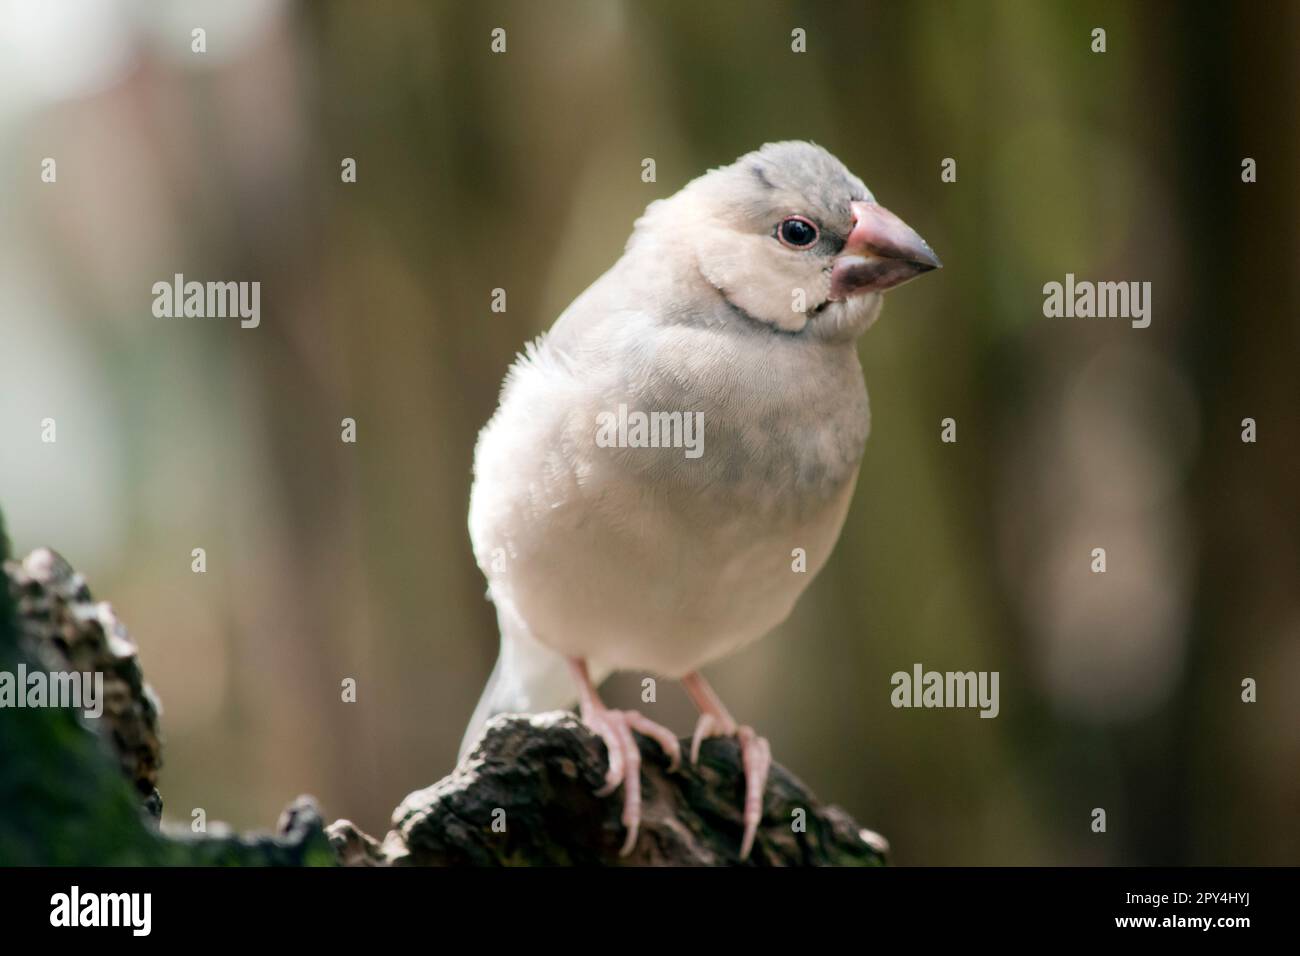 the young java finch is changing to his adult coloring Stock Photo